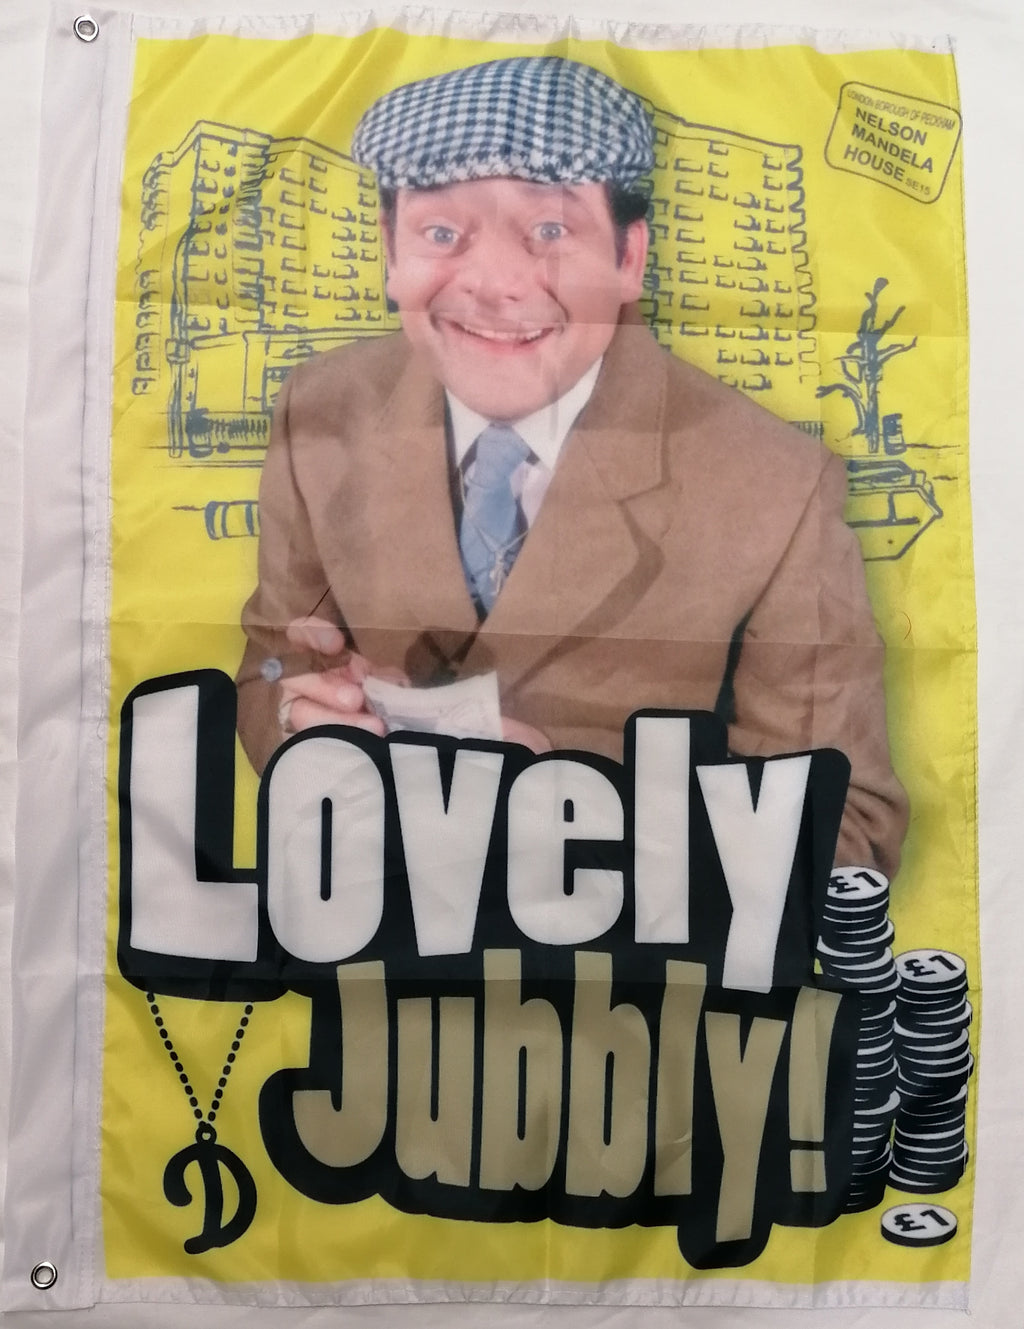 Only fools and horses lovely jubbly flag